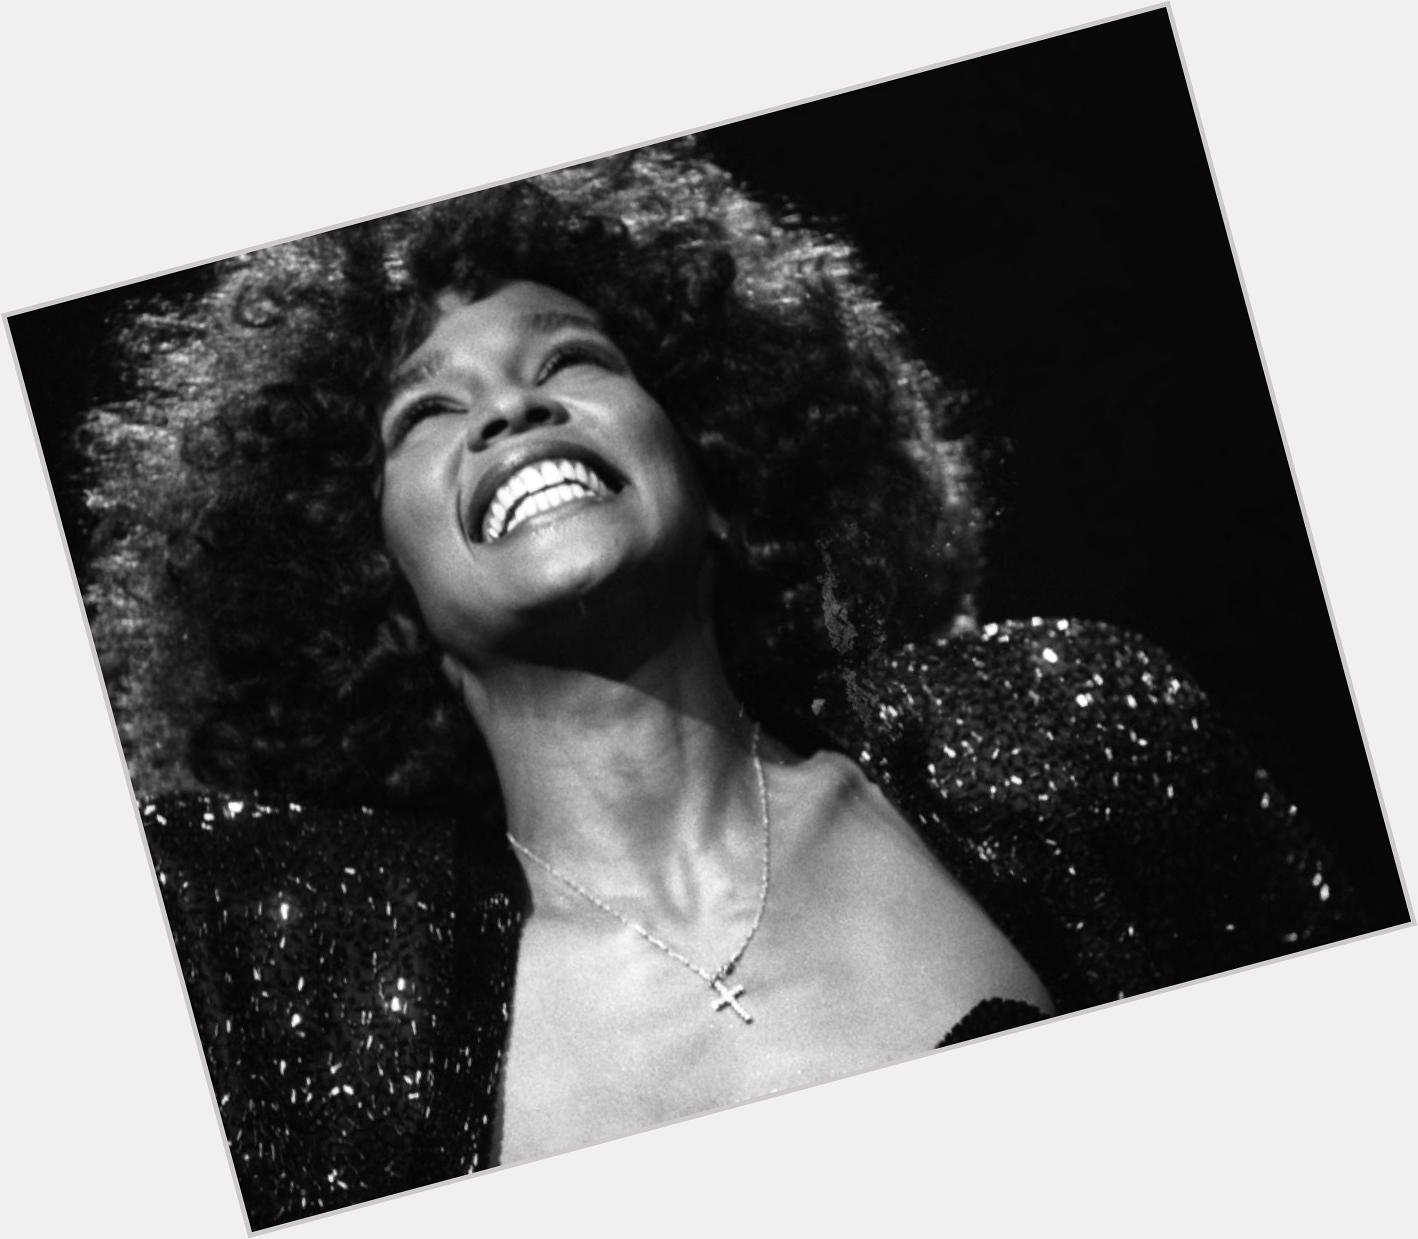 ON-AIR I\m every woman (live in SA) | Whitney Houston | Happy birthday Whitney!
We LOVE YOU! 